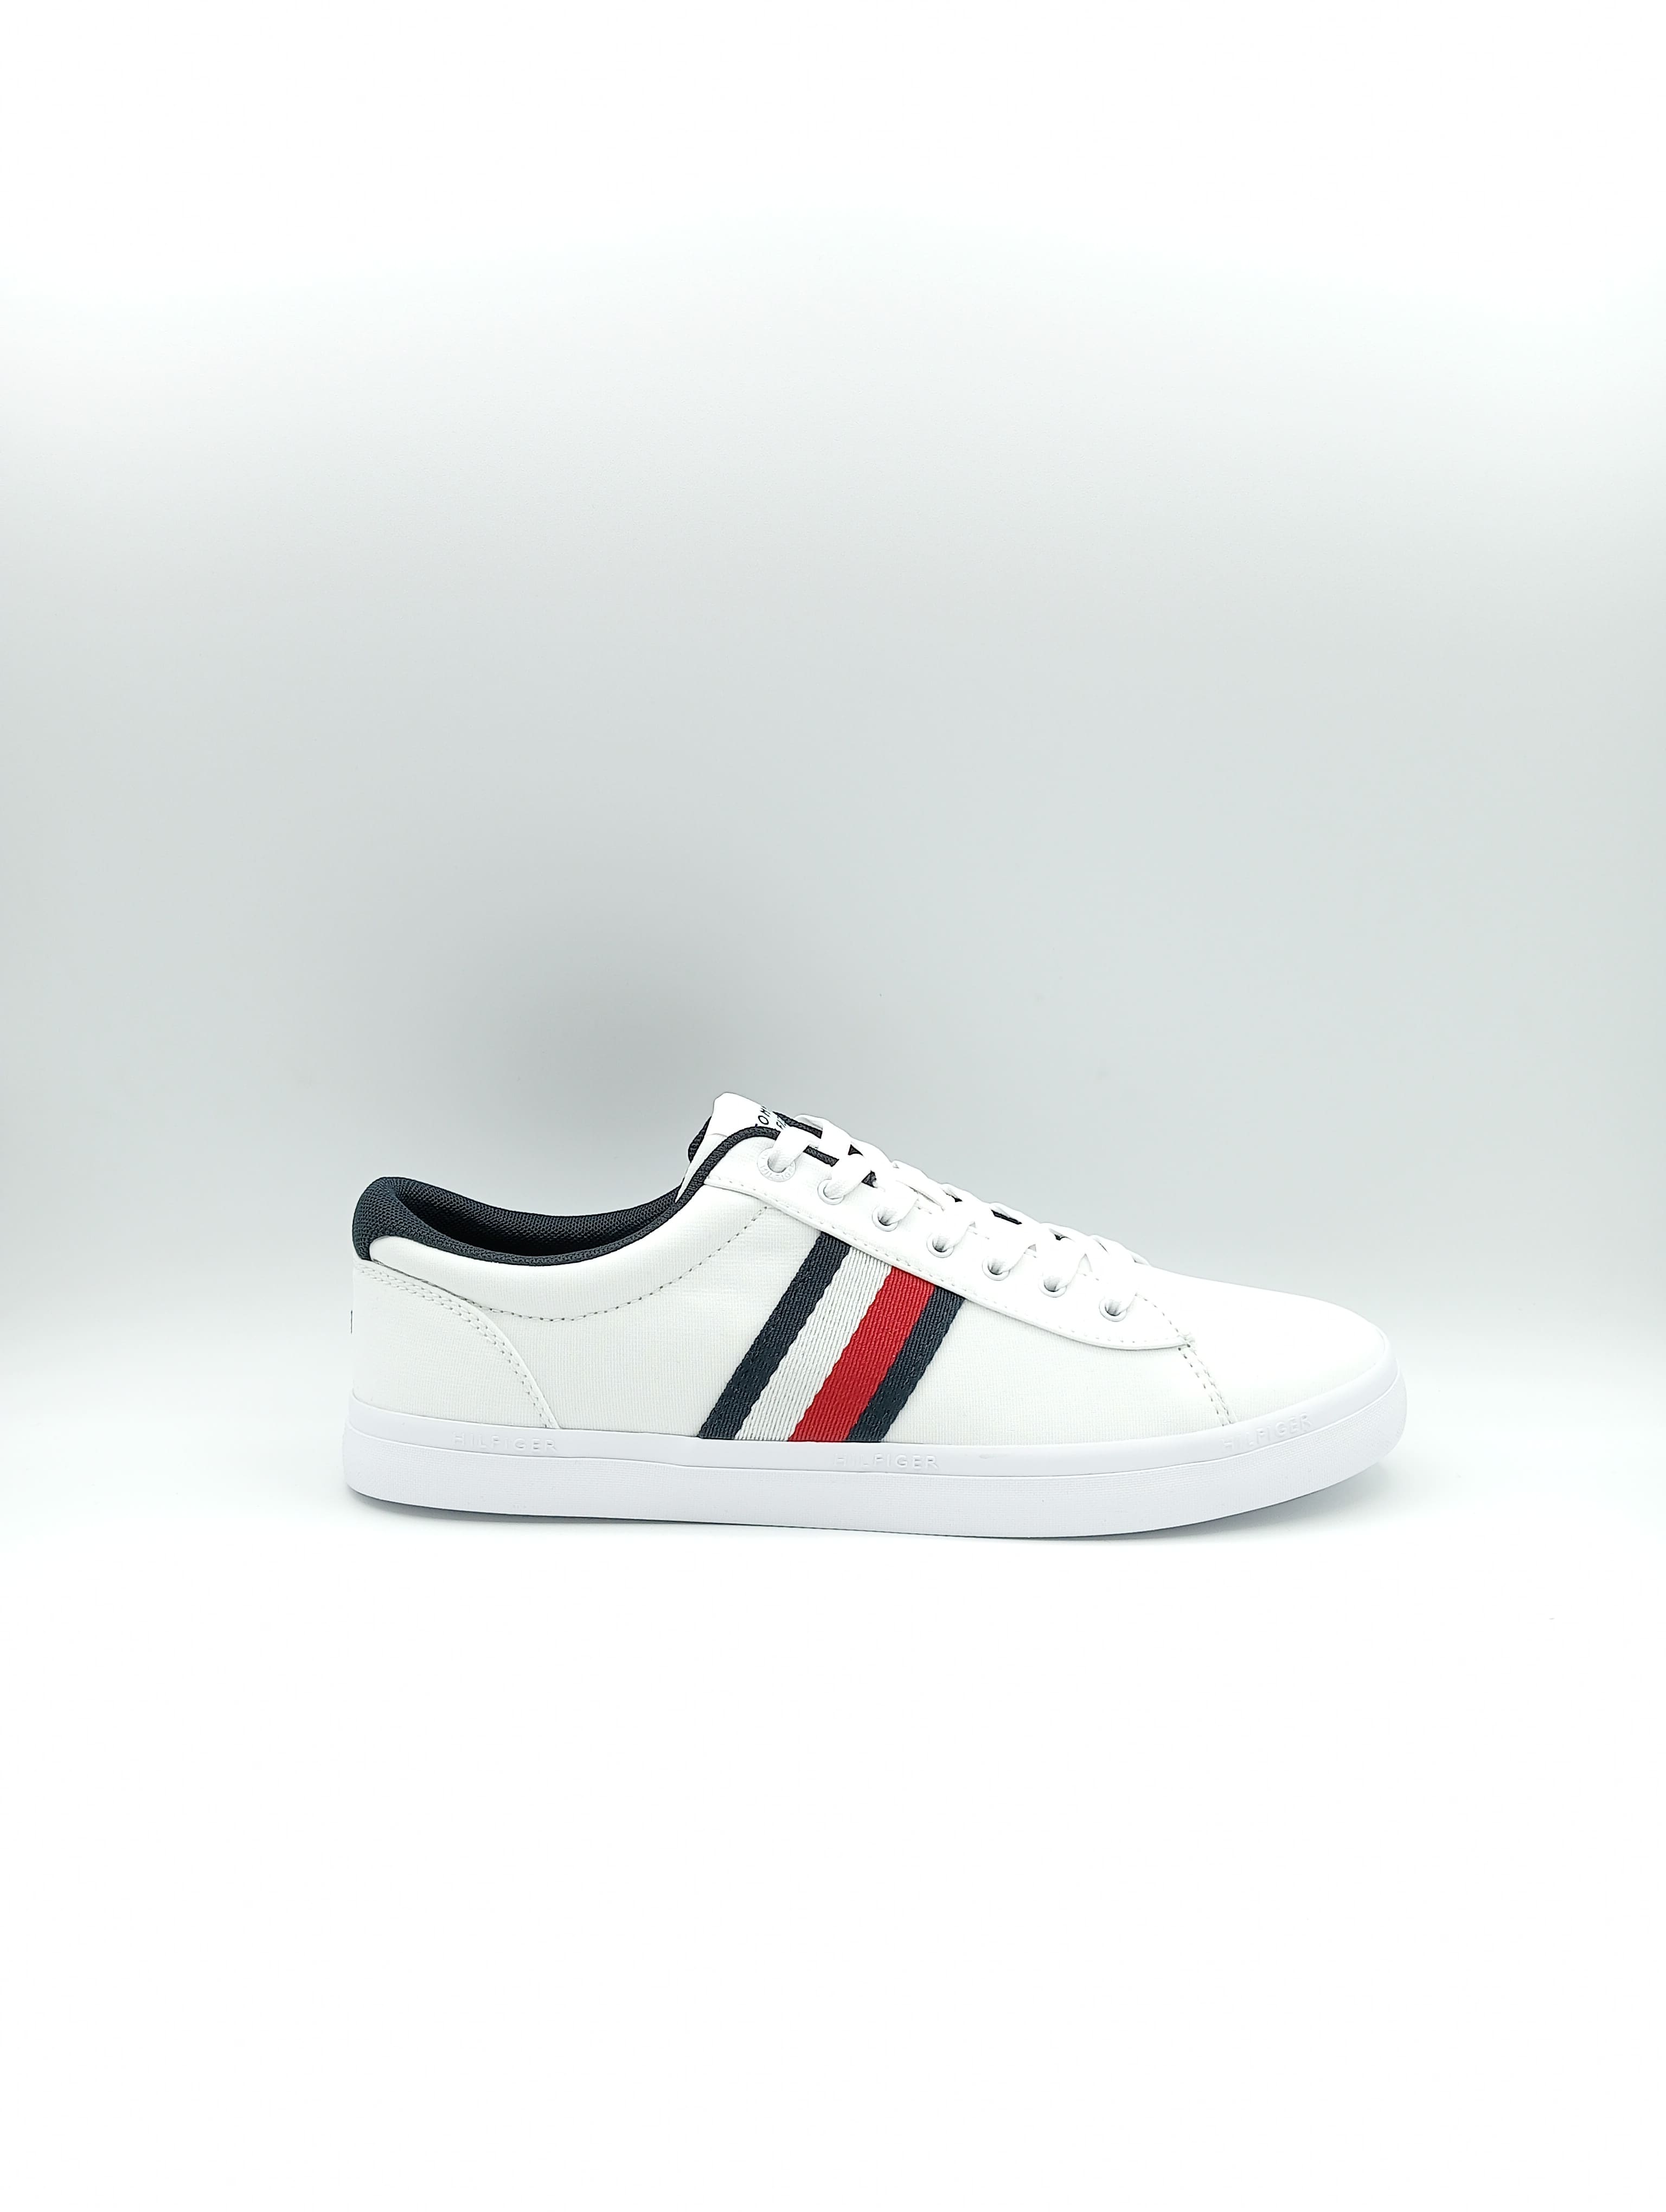 Sneakers uomo Tommy Hilfiger in canvas.